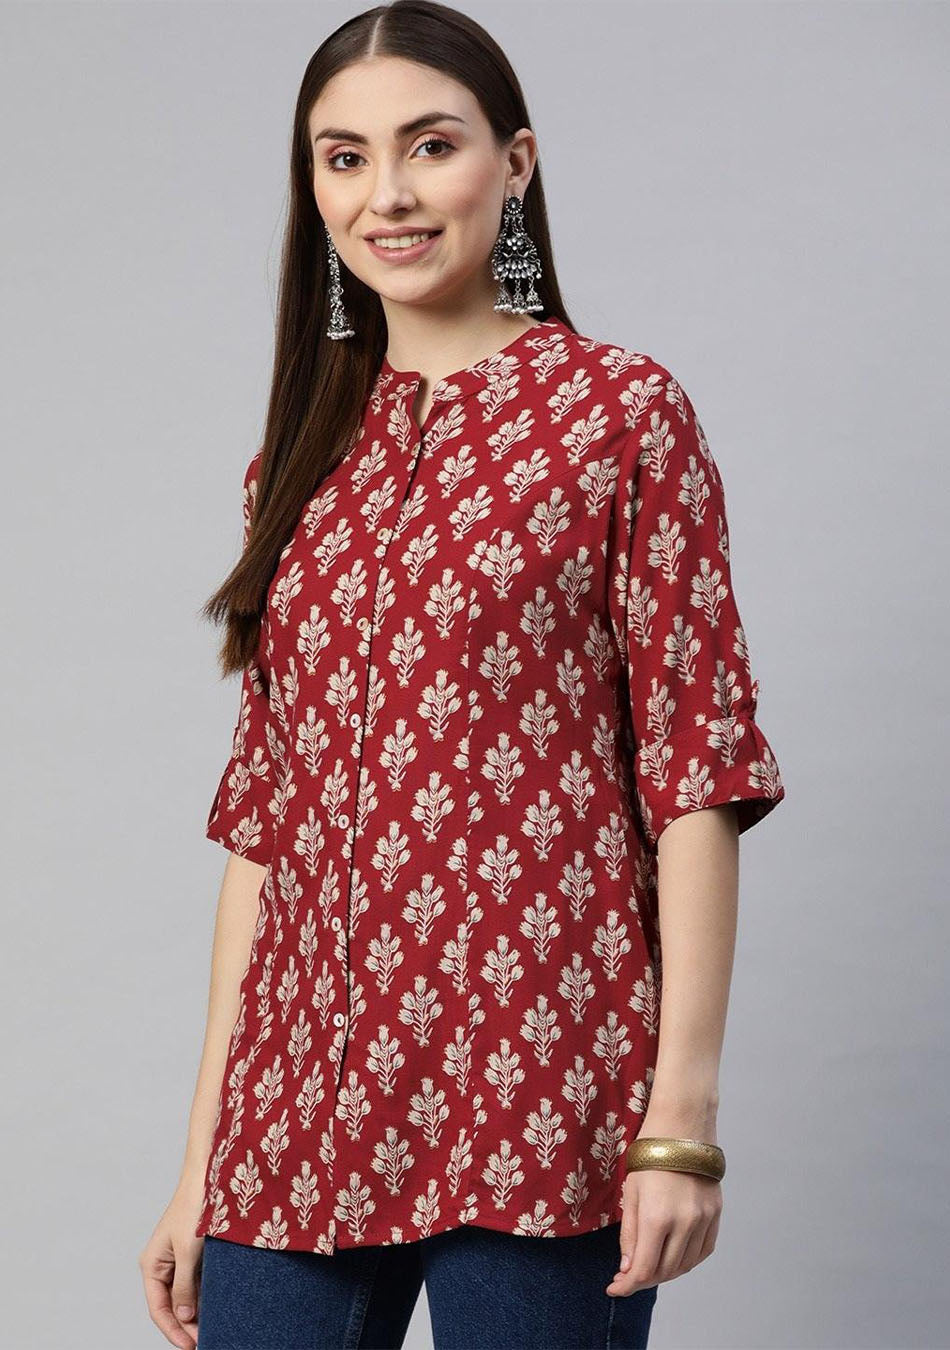 Dark Maroon Floral Rayon A-line Shirts Style Top